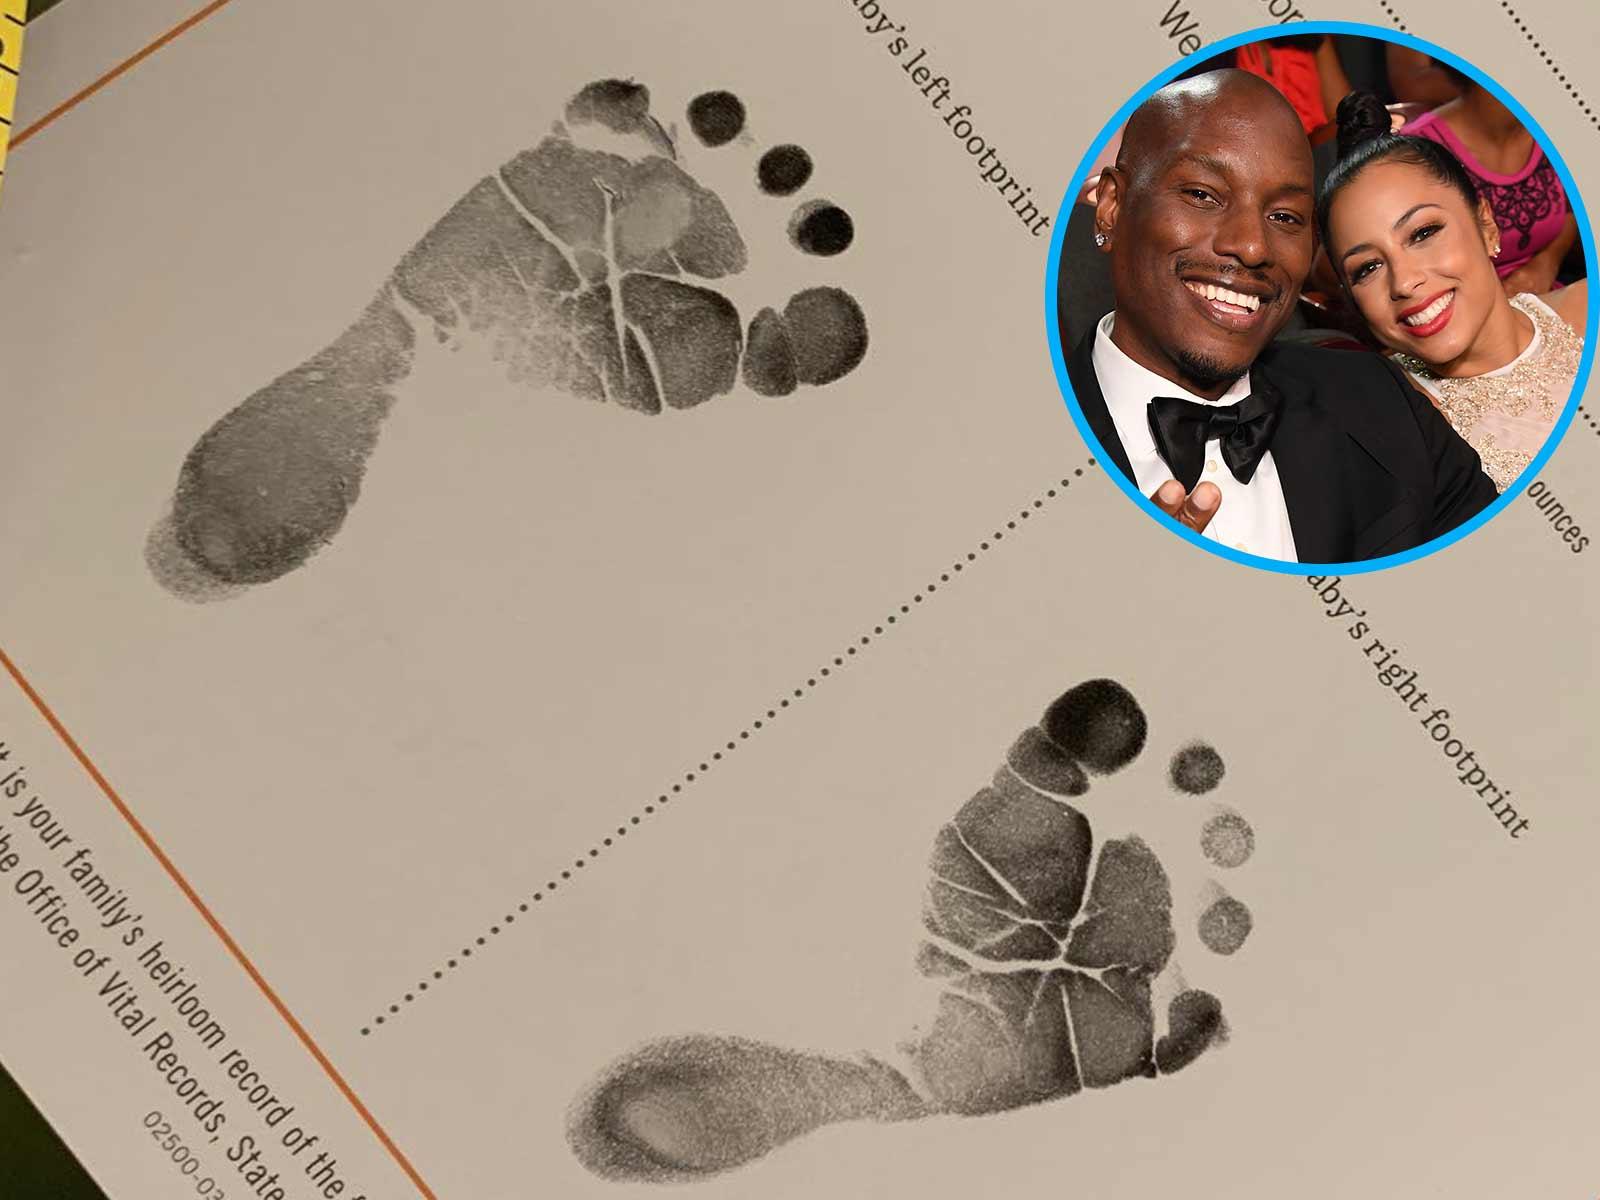 Tyrese Gibson & Wife Welcome Their First Daughter Together After 30 Hours of Labor